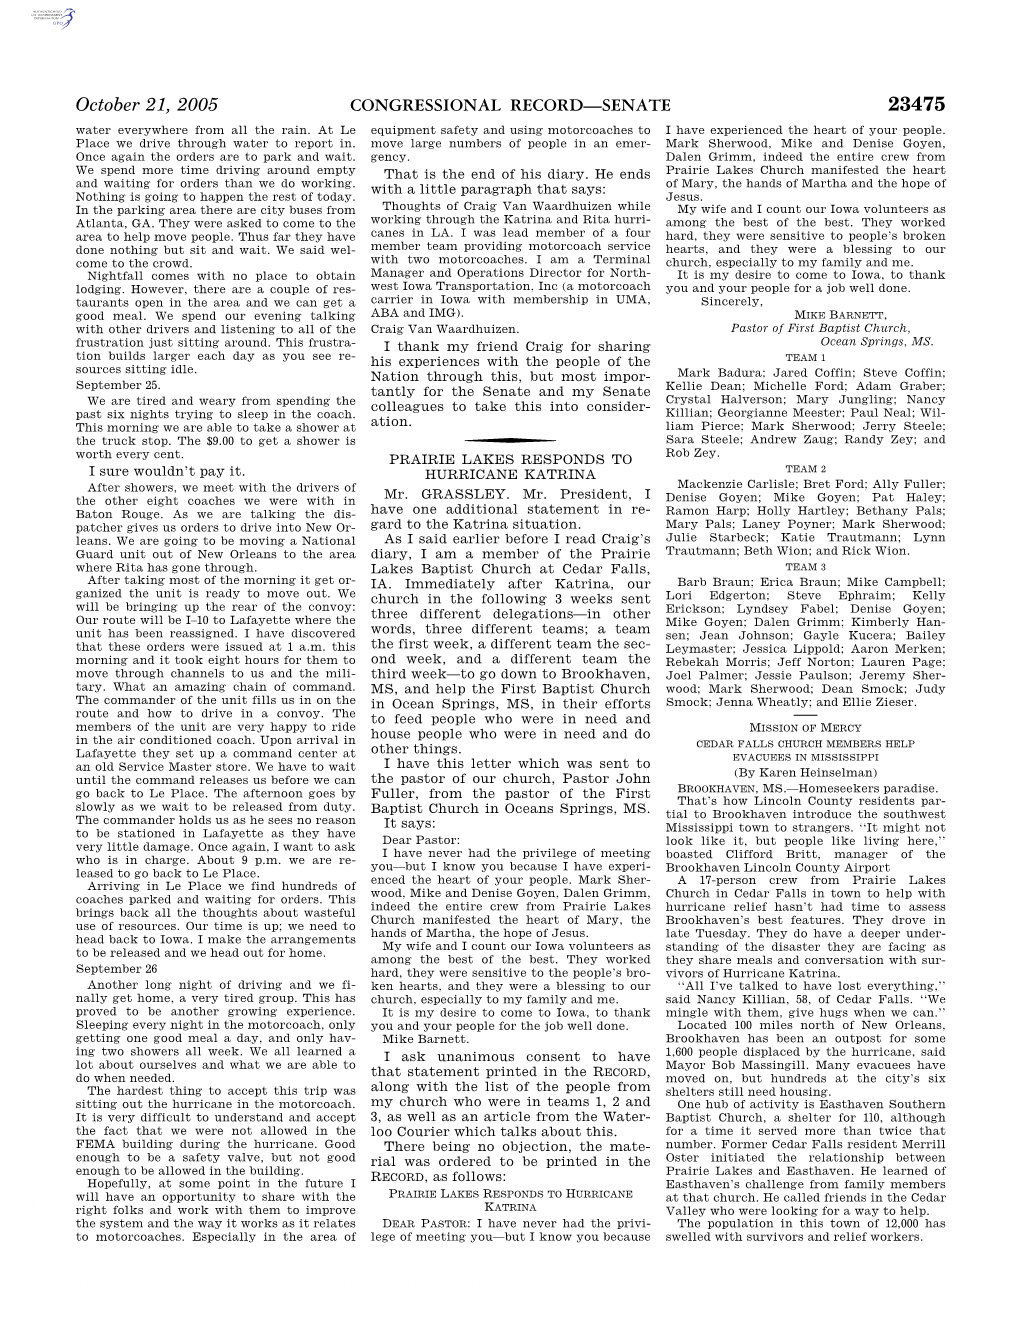 CONGRESSIONAL RECORD—SENATE October 21, 2005 Members of the Indiana National Guard, Able Than Expected